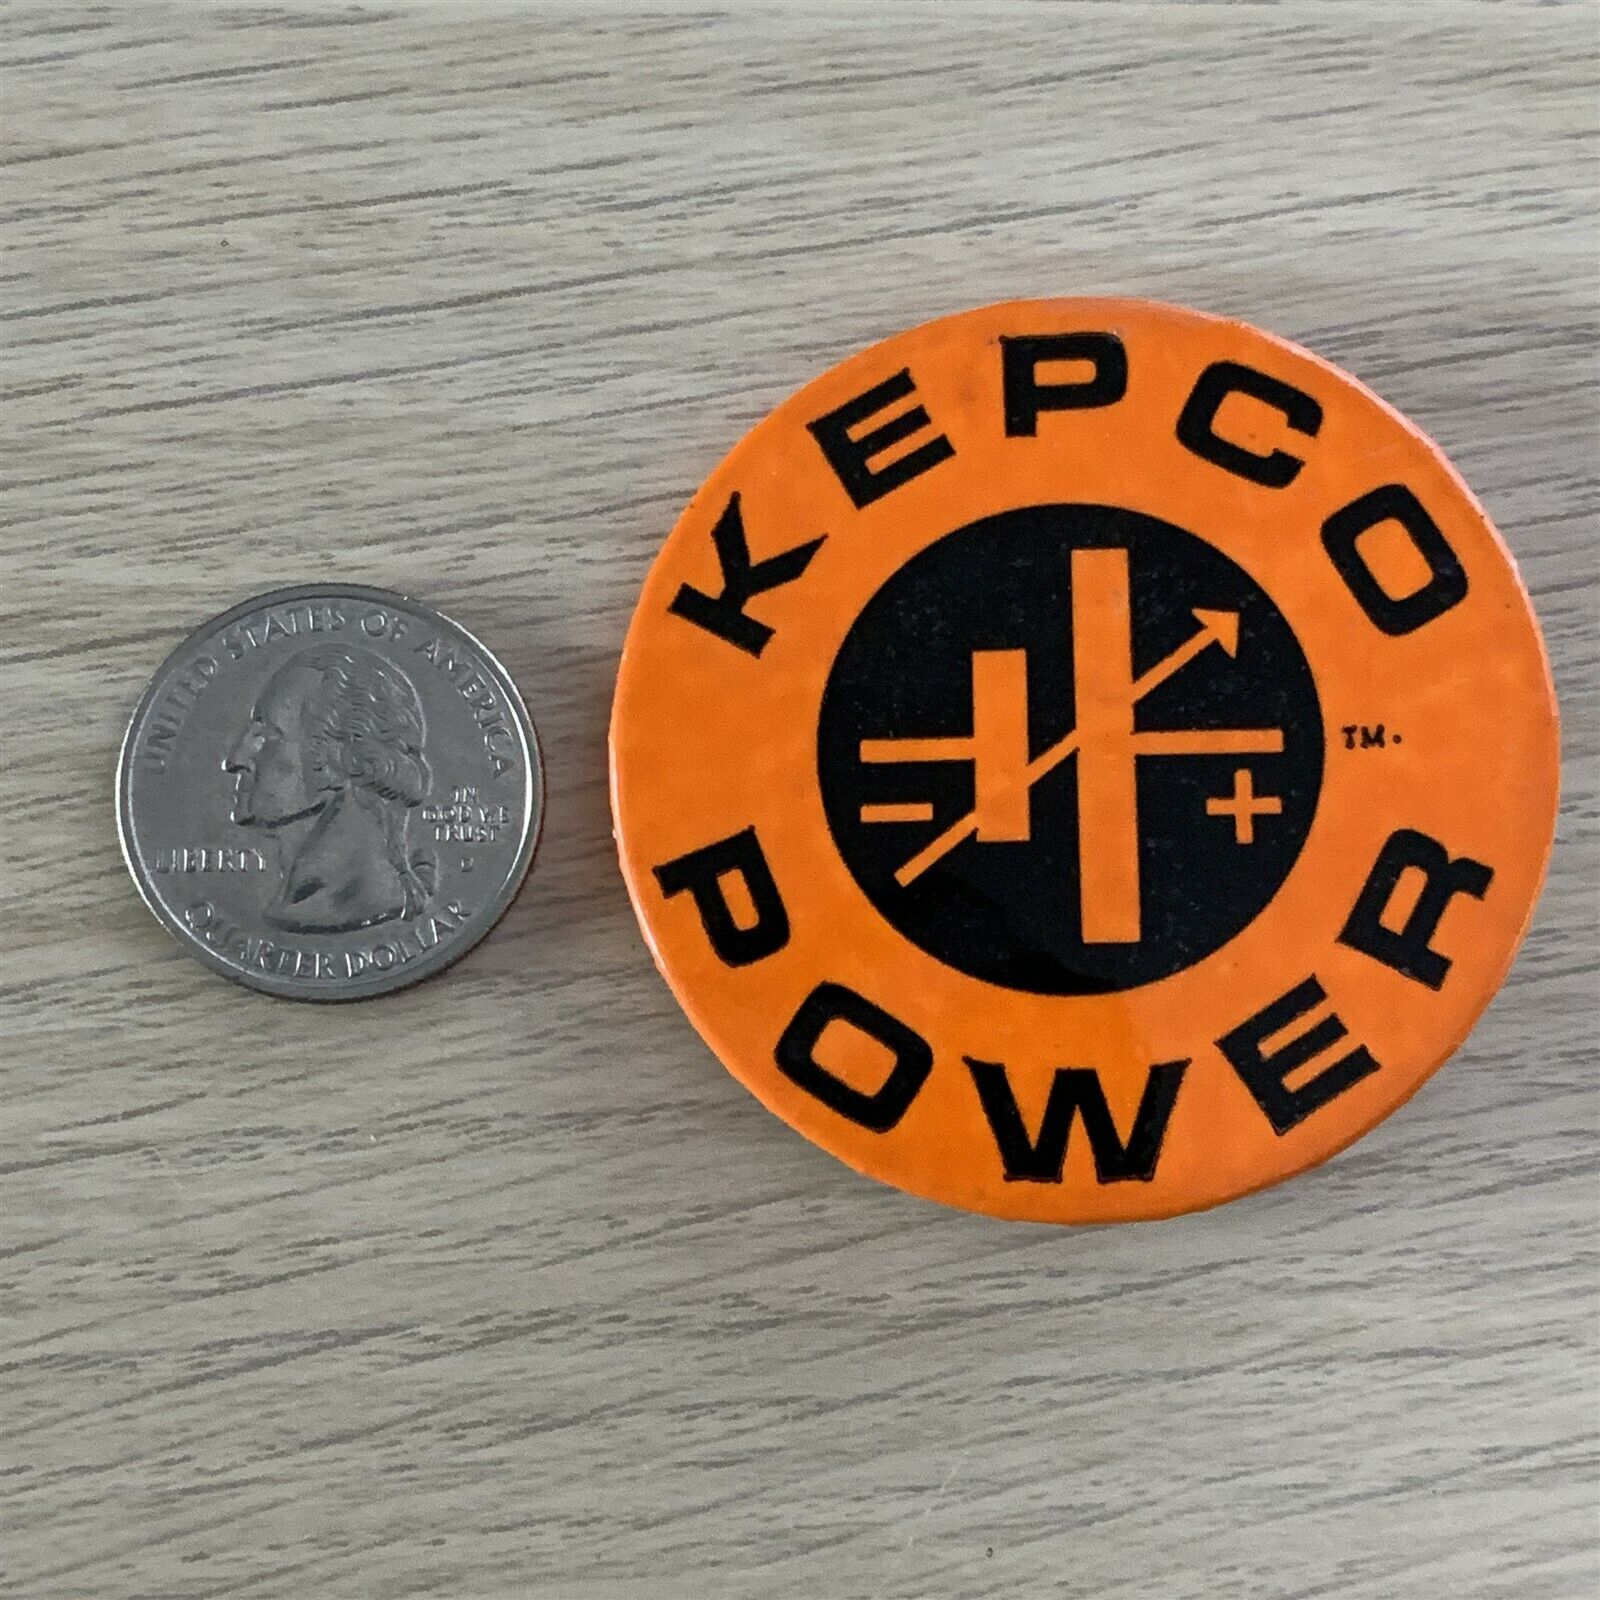 Kepco Power Power Supply Manufacture Vintage Pin Pinback Button #40396